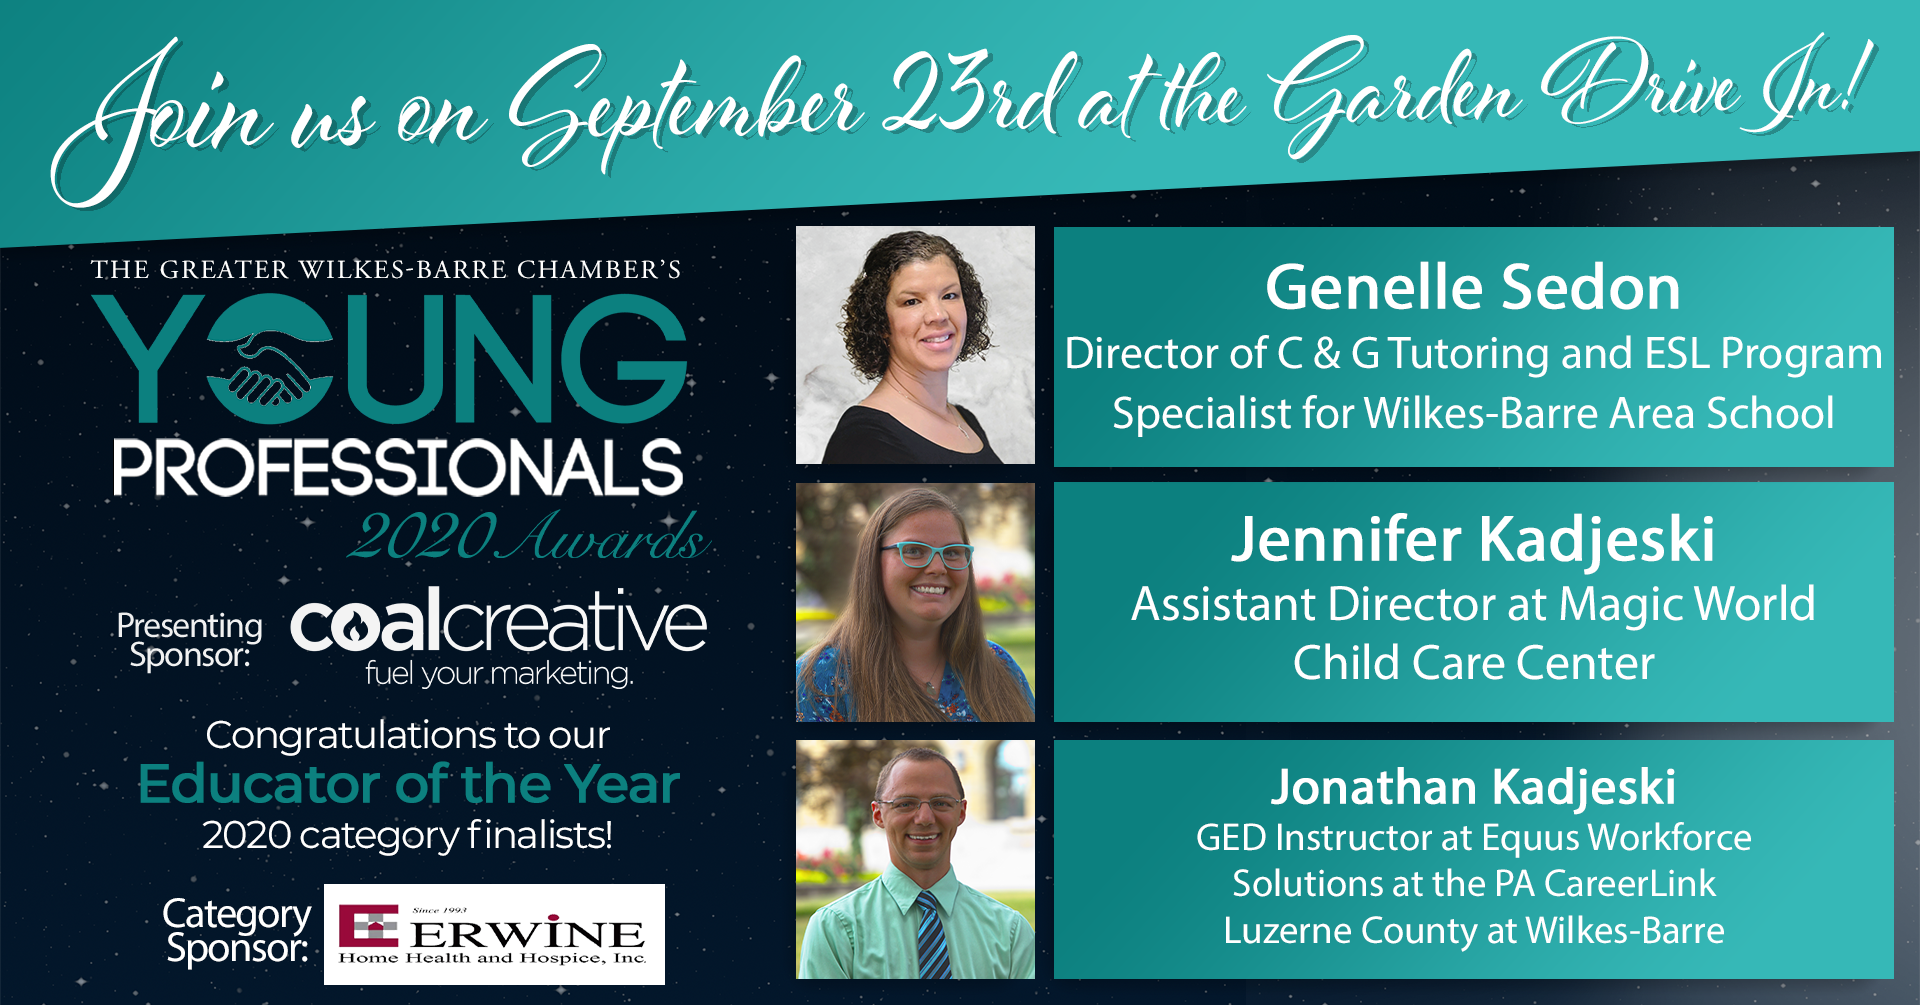 Meet the 2020 Young Professionals Category Finalists for Educator of the Year!